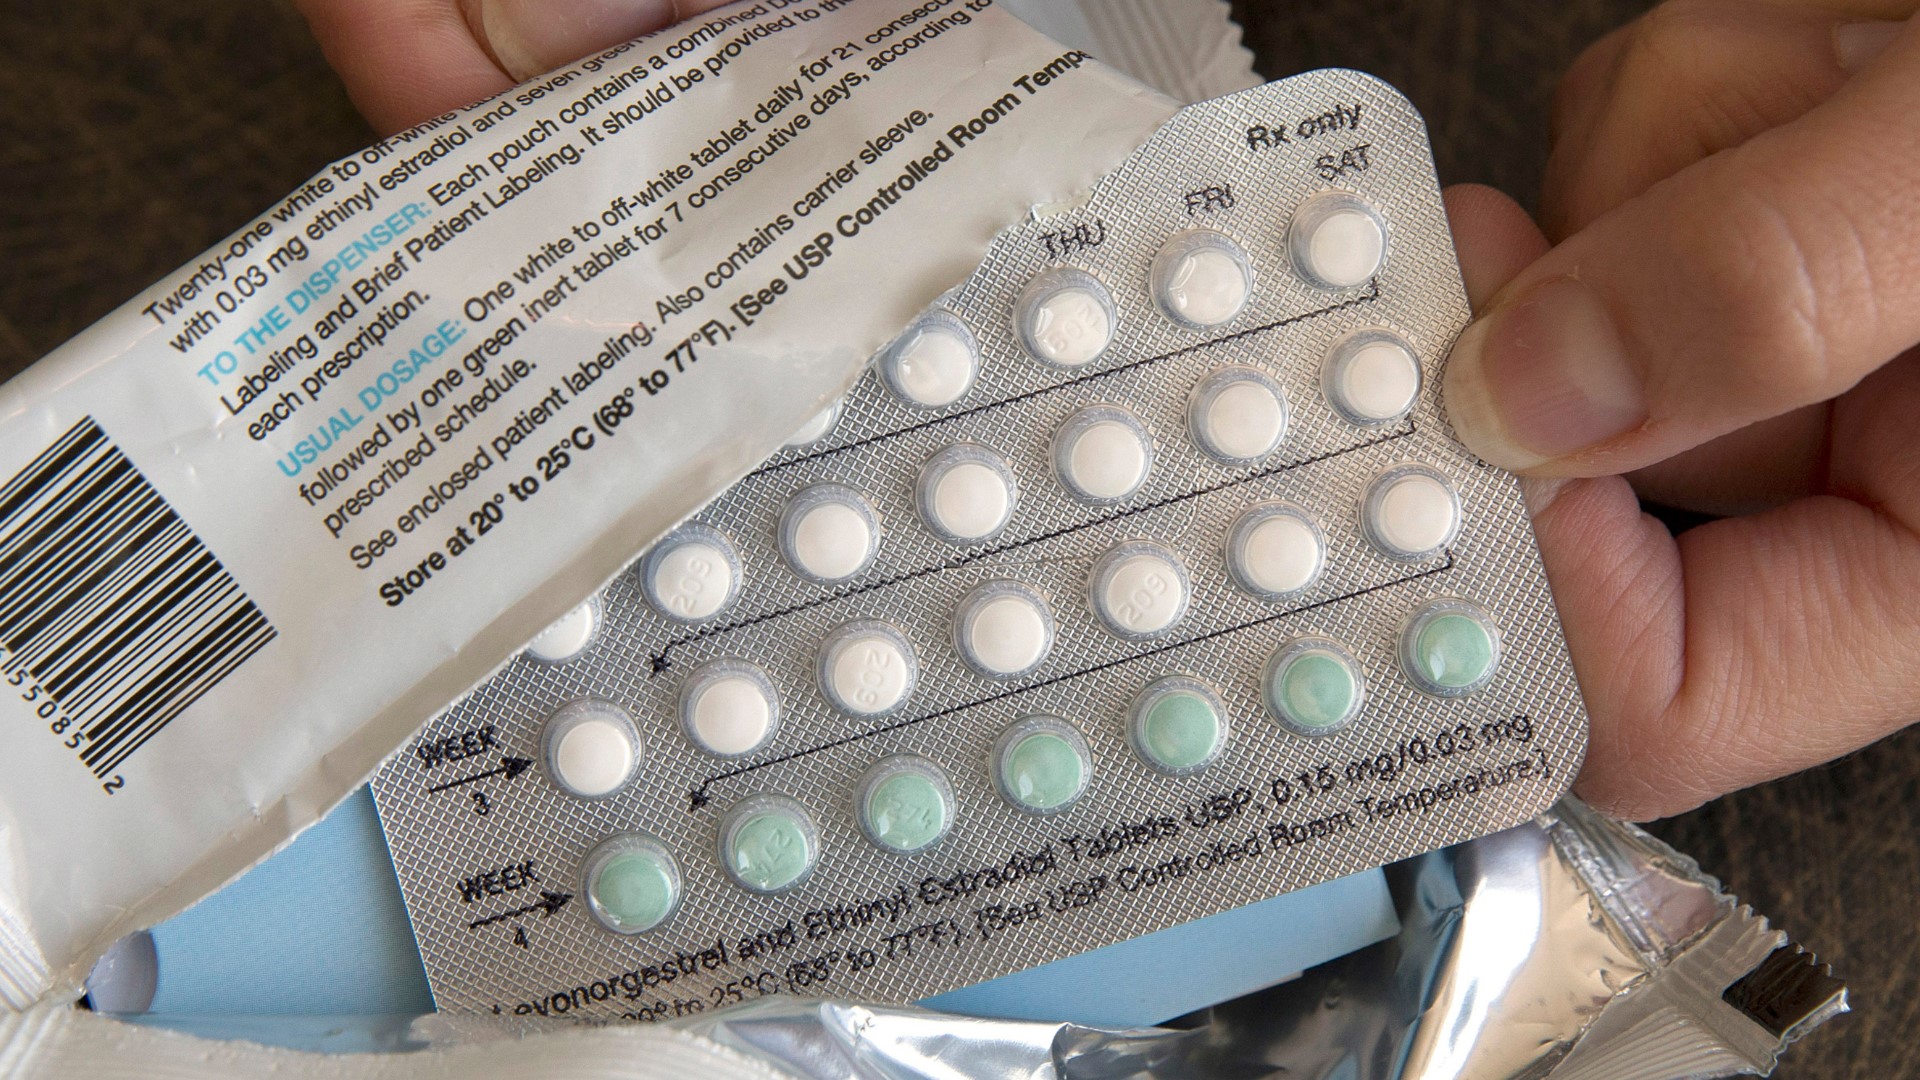 With the overturning of Roe v. Wade, there is a new push for easier access to birth control. Soon the pill could be available over the counter.